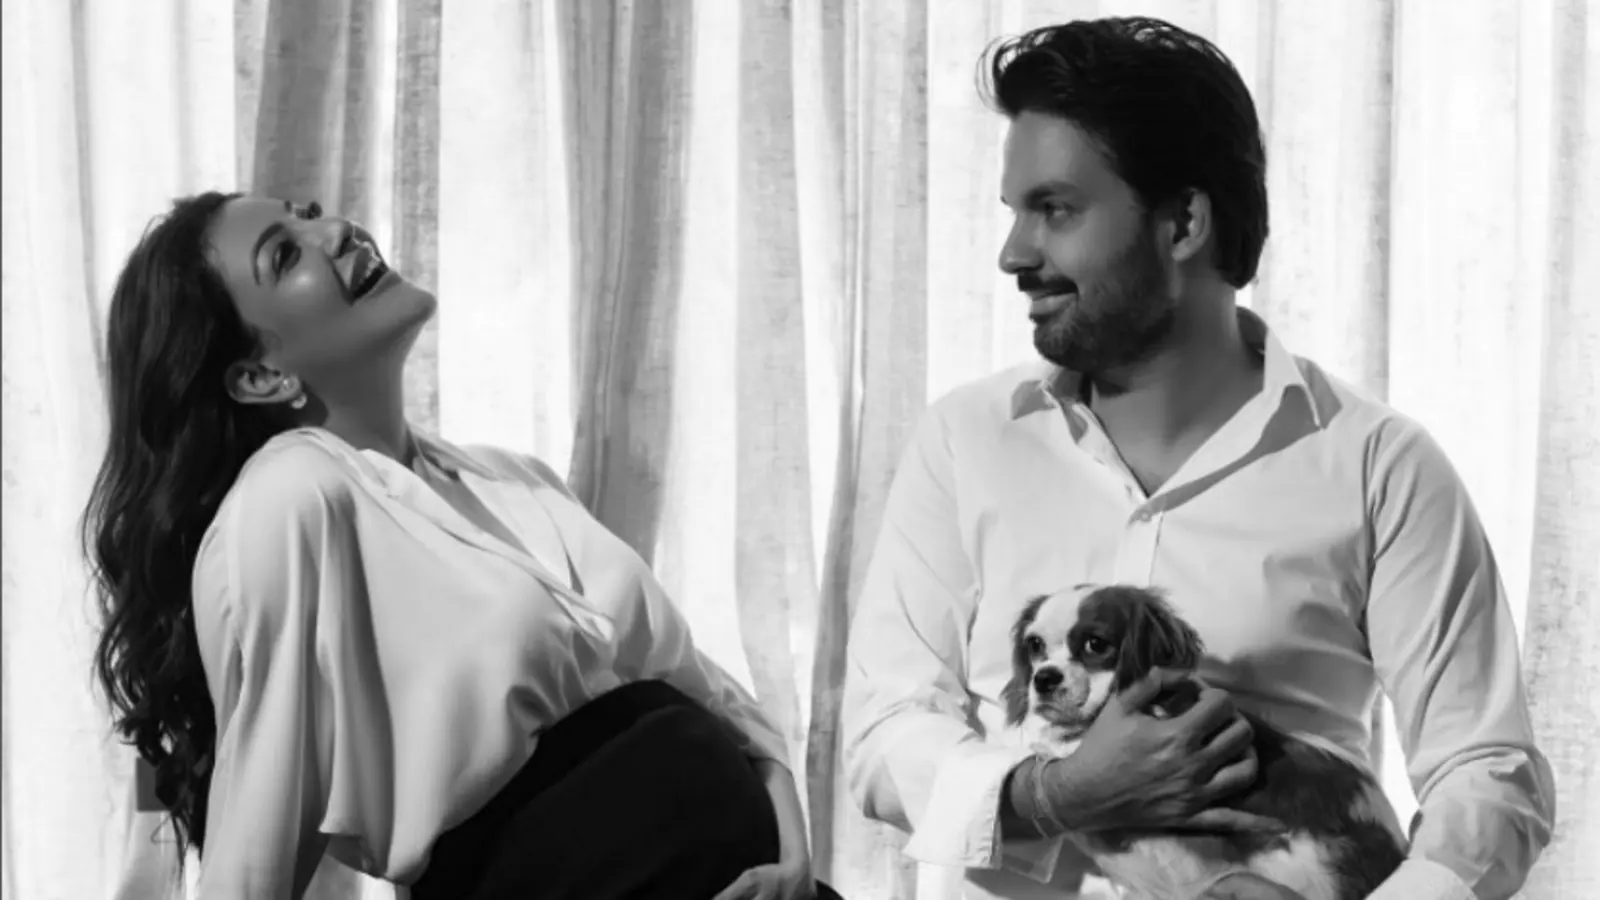 Mom-to-be Kajal Aggarwal poses for family portrait with husband Gautam Kitchlu and pet dog Mia, fans are all heart